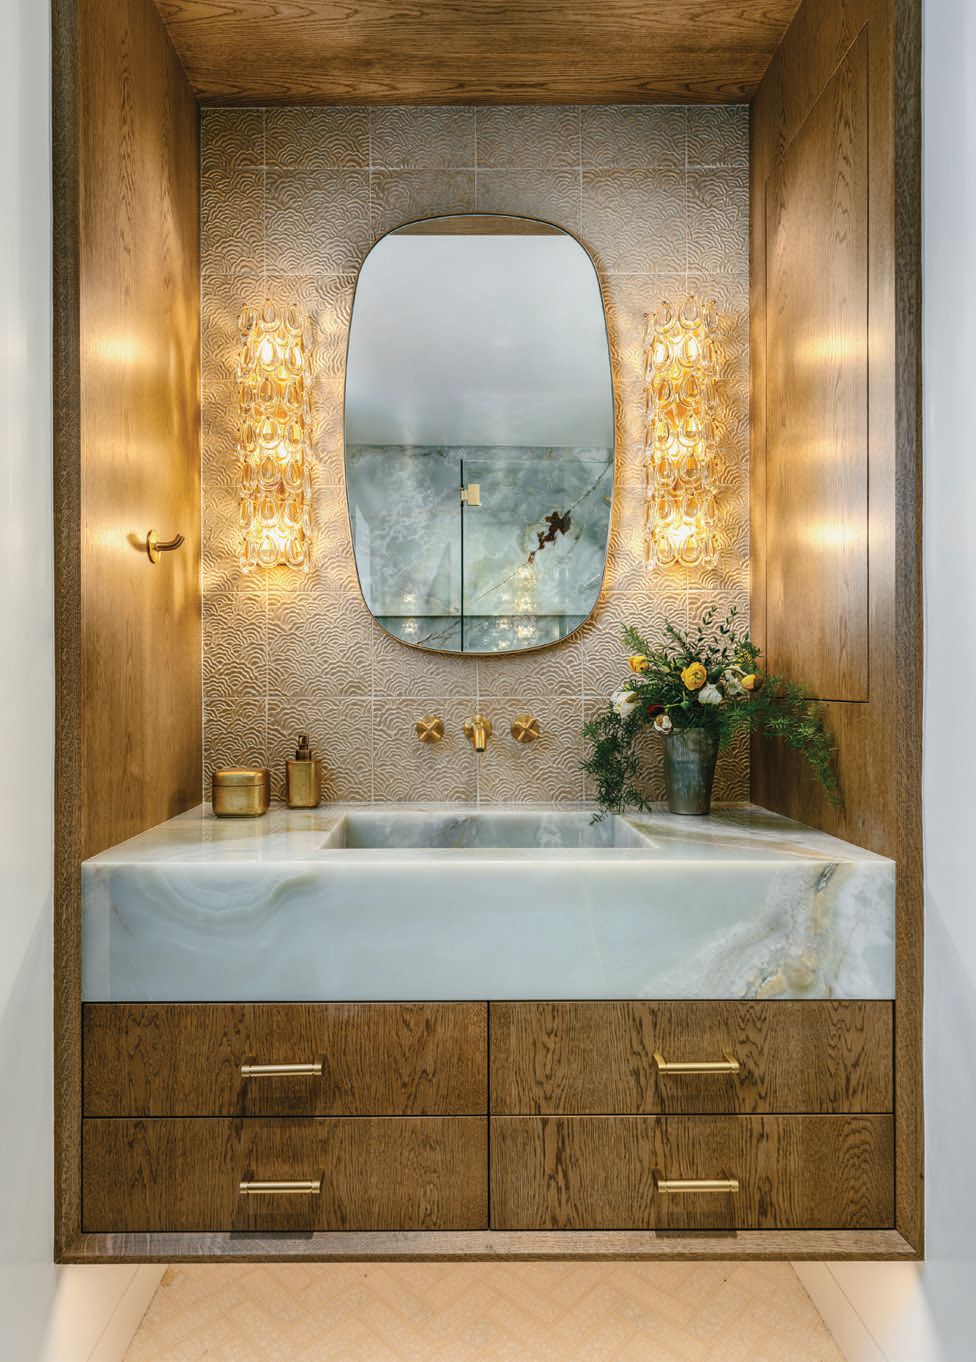 Stone and wood work in accord in a guest bathroom. PHOTOGRAPHED BY CHRISTOPHER STARK